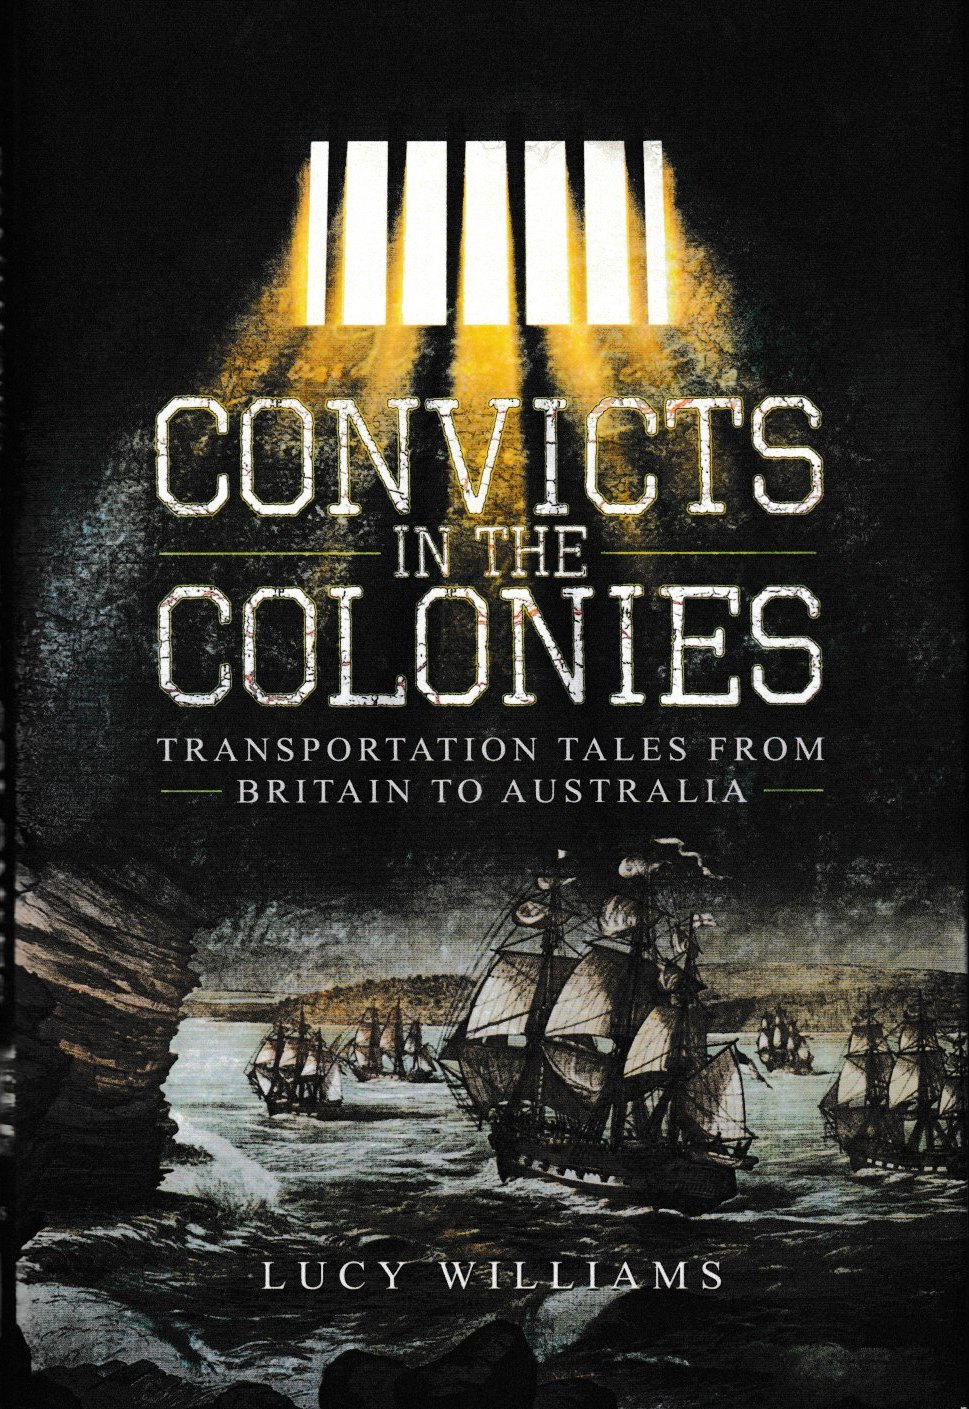 Convicts in the Colonies - Transportation Tales from Britain to Australia